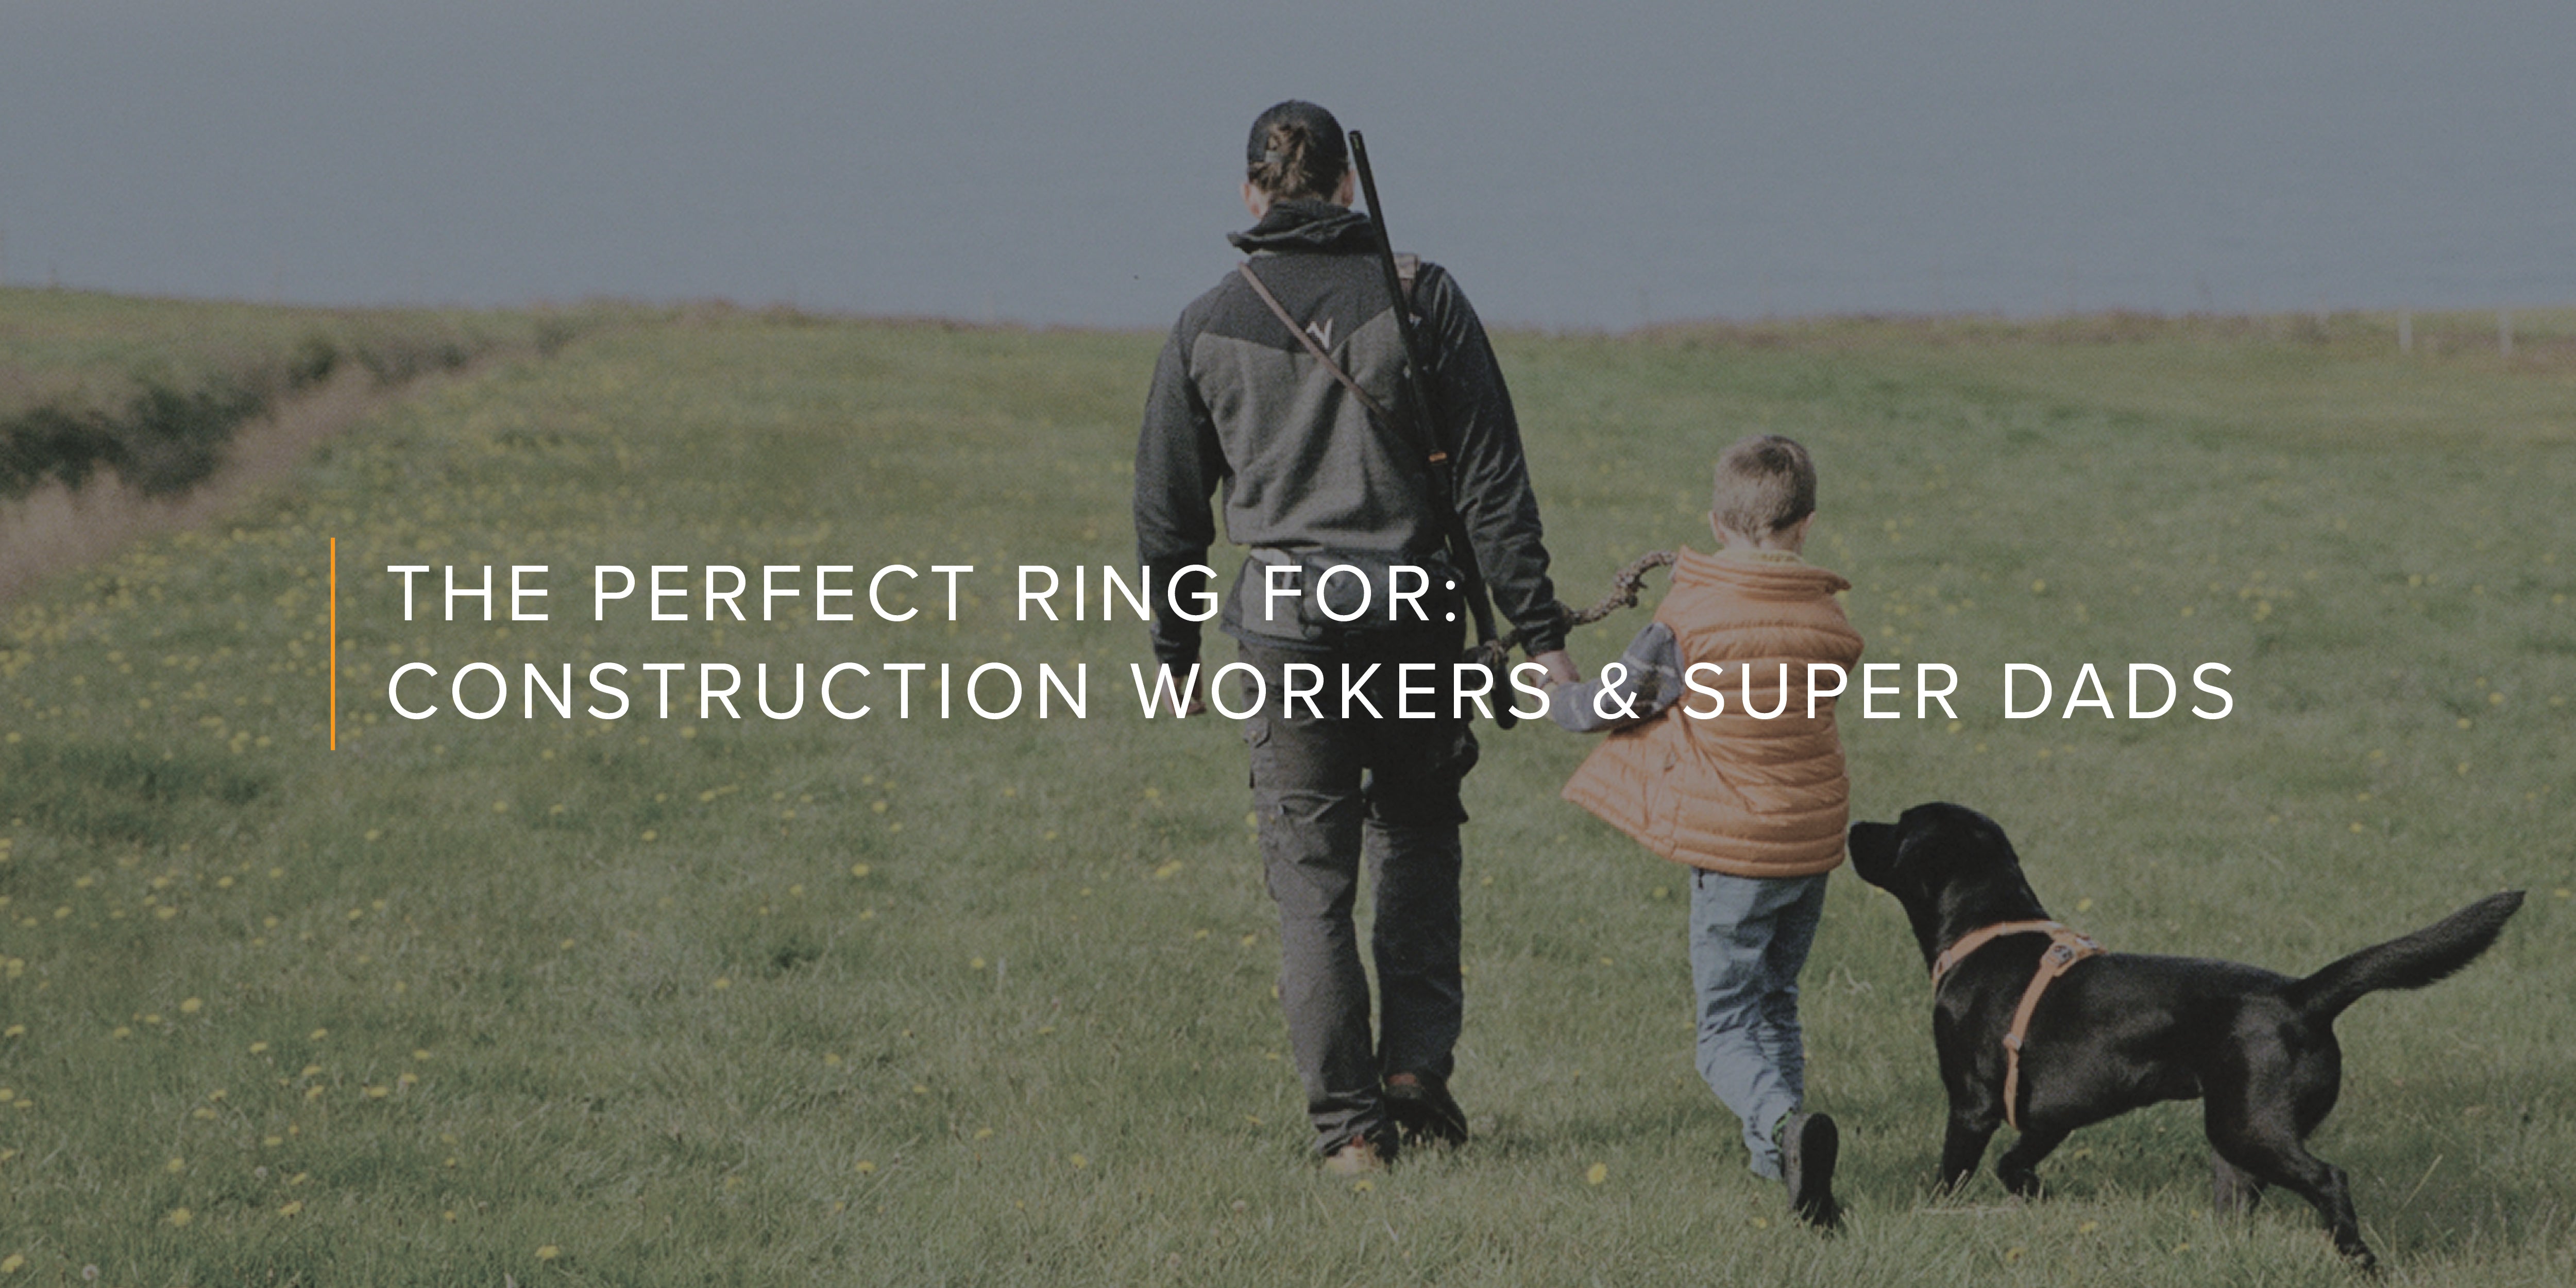 The Perfect Ring For: Construction Workers & Super Dads